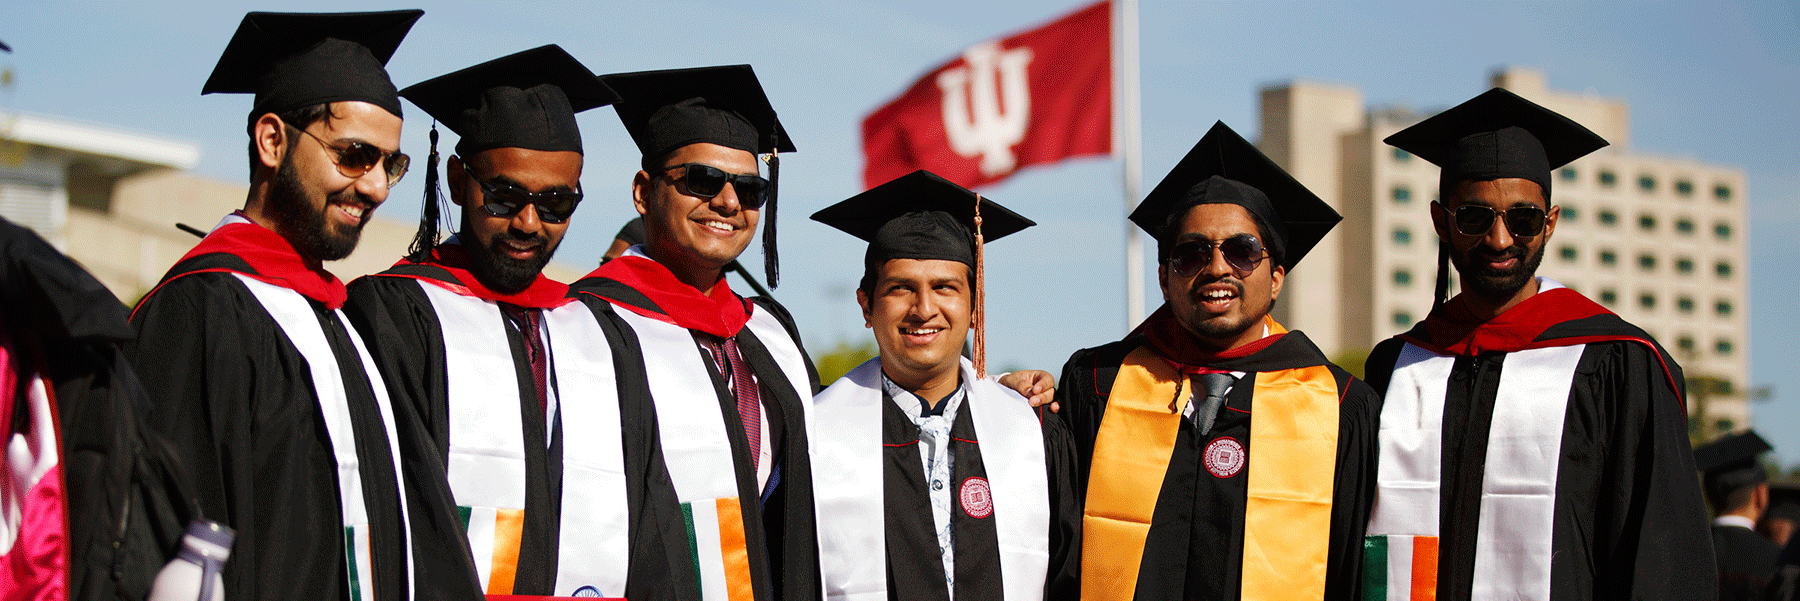 A group of male graduates standing in a line and smiling.